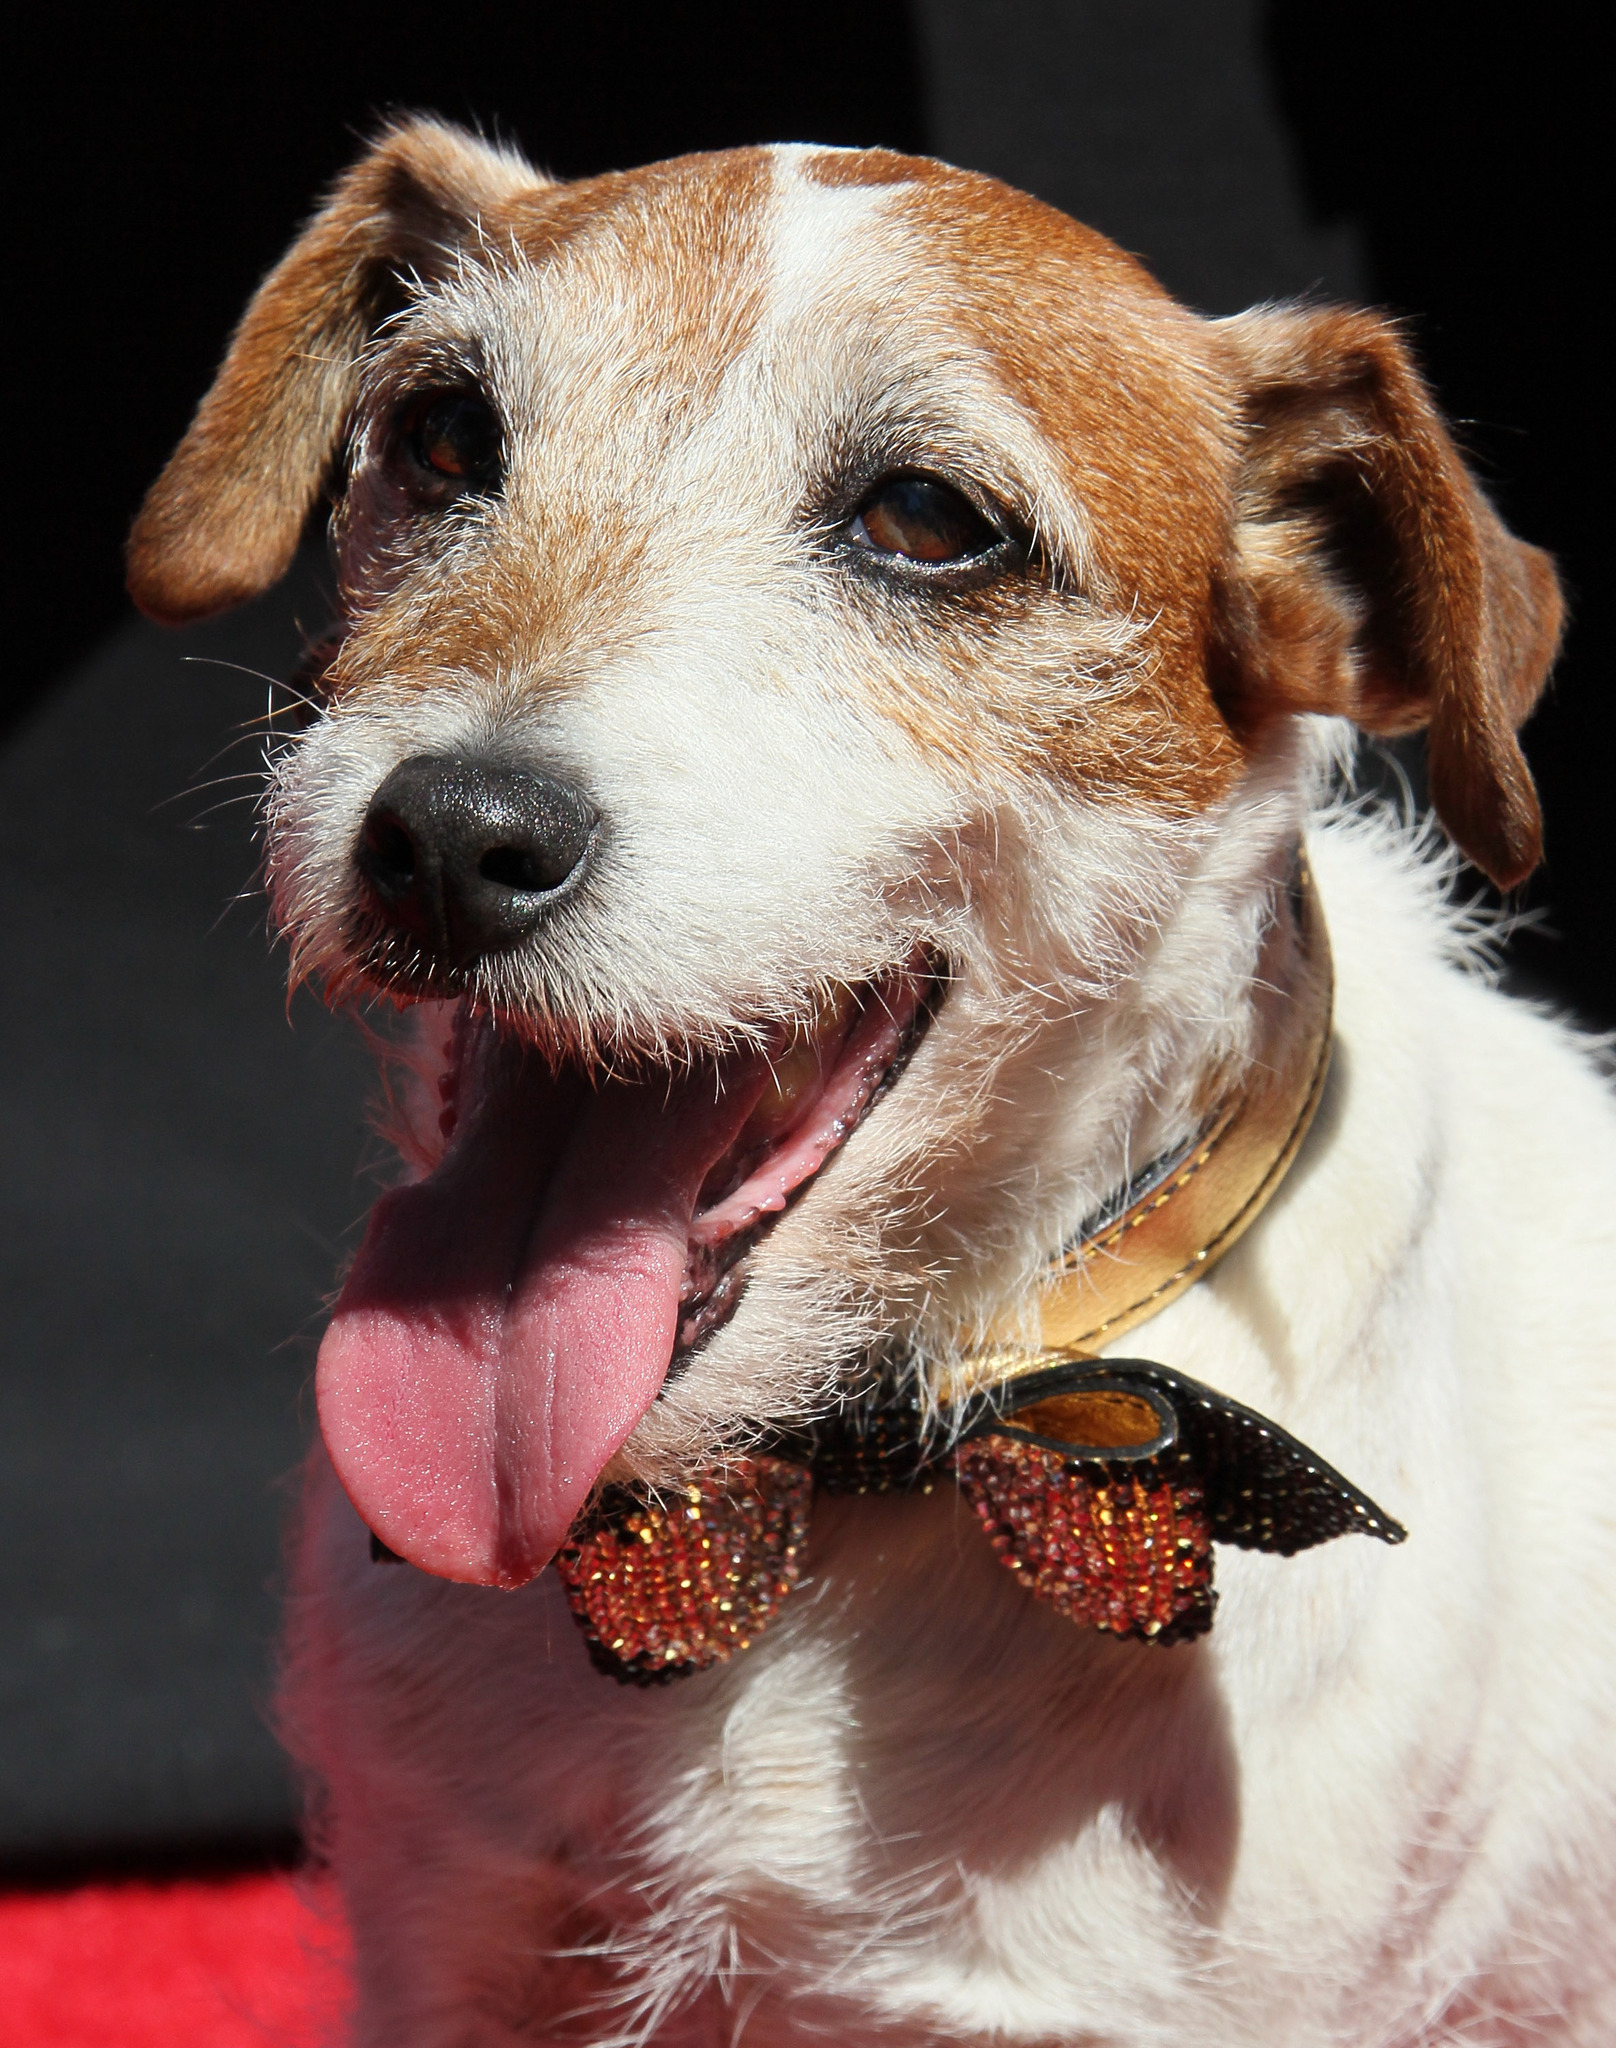 Uggie at event of Artistas (2011)